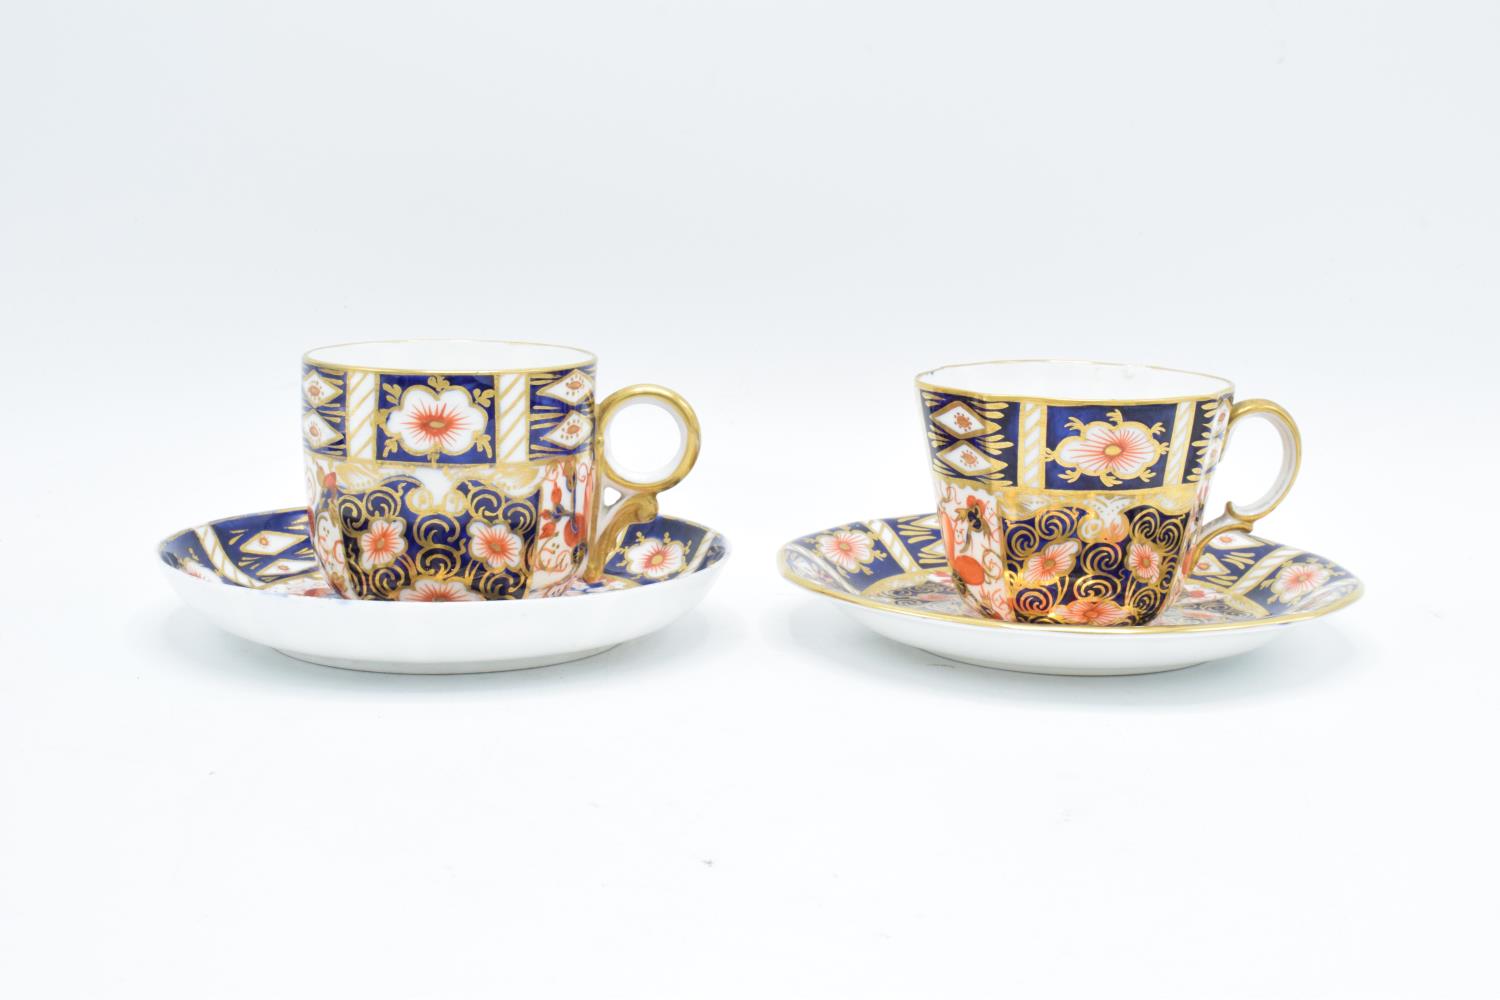 Royal Crown Derby early 20th century Imari cups and saucers (2 duos) All first quality. Both sets